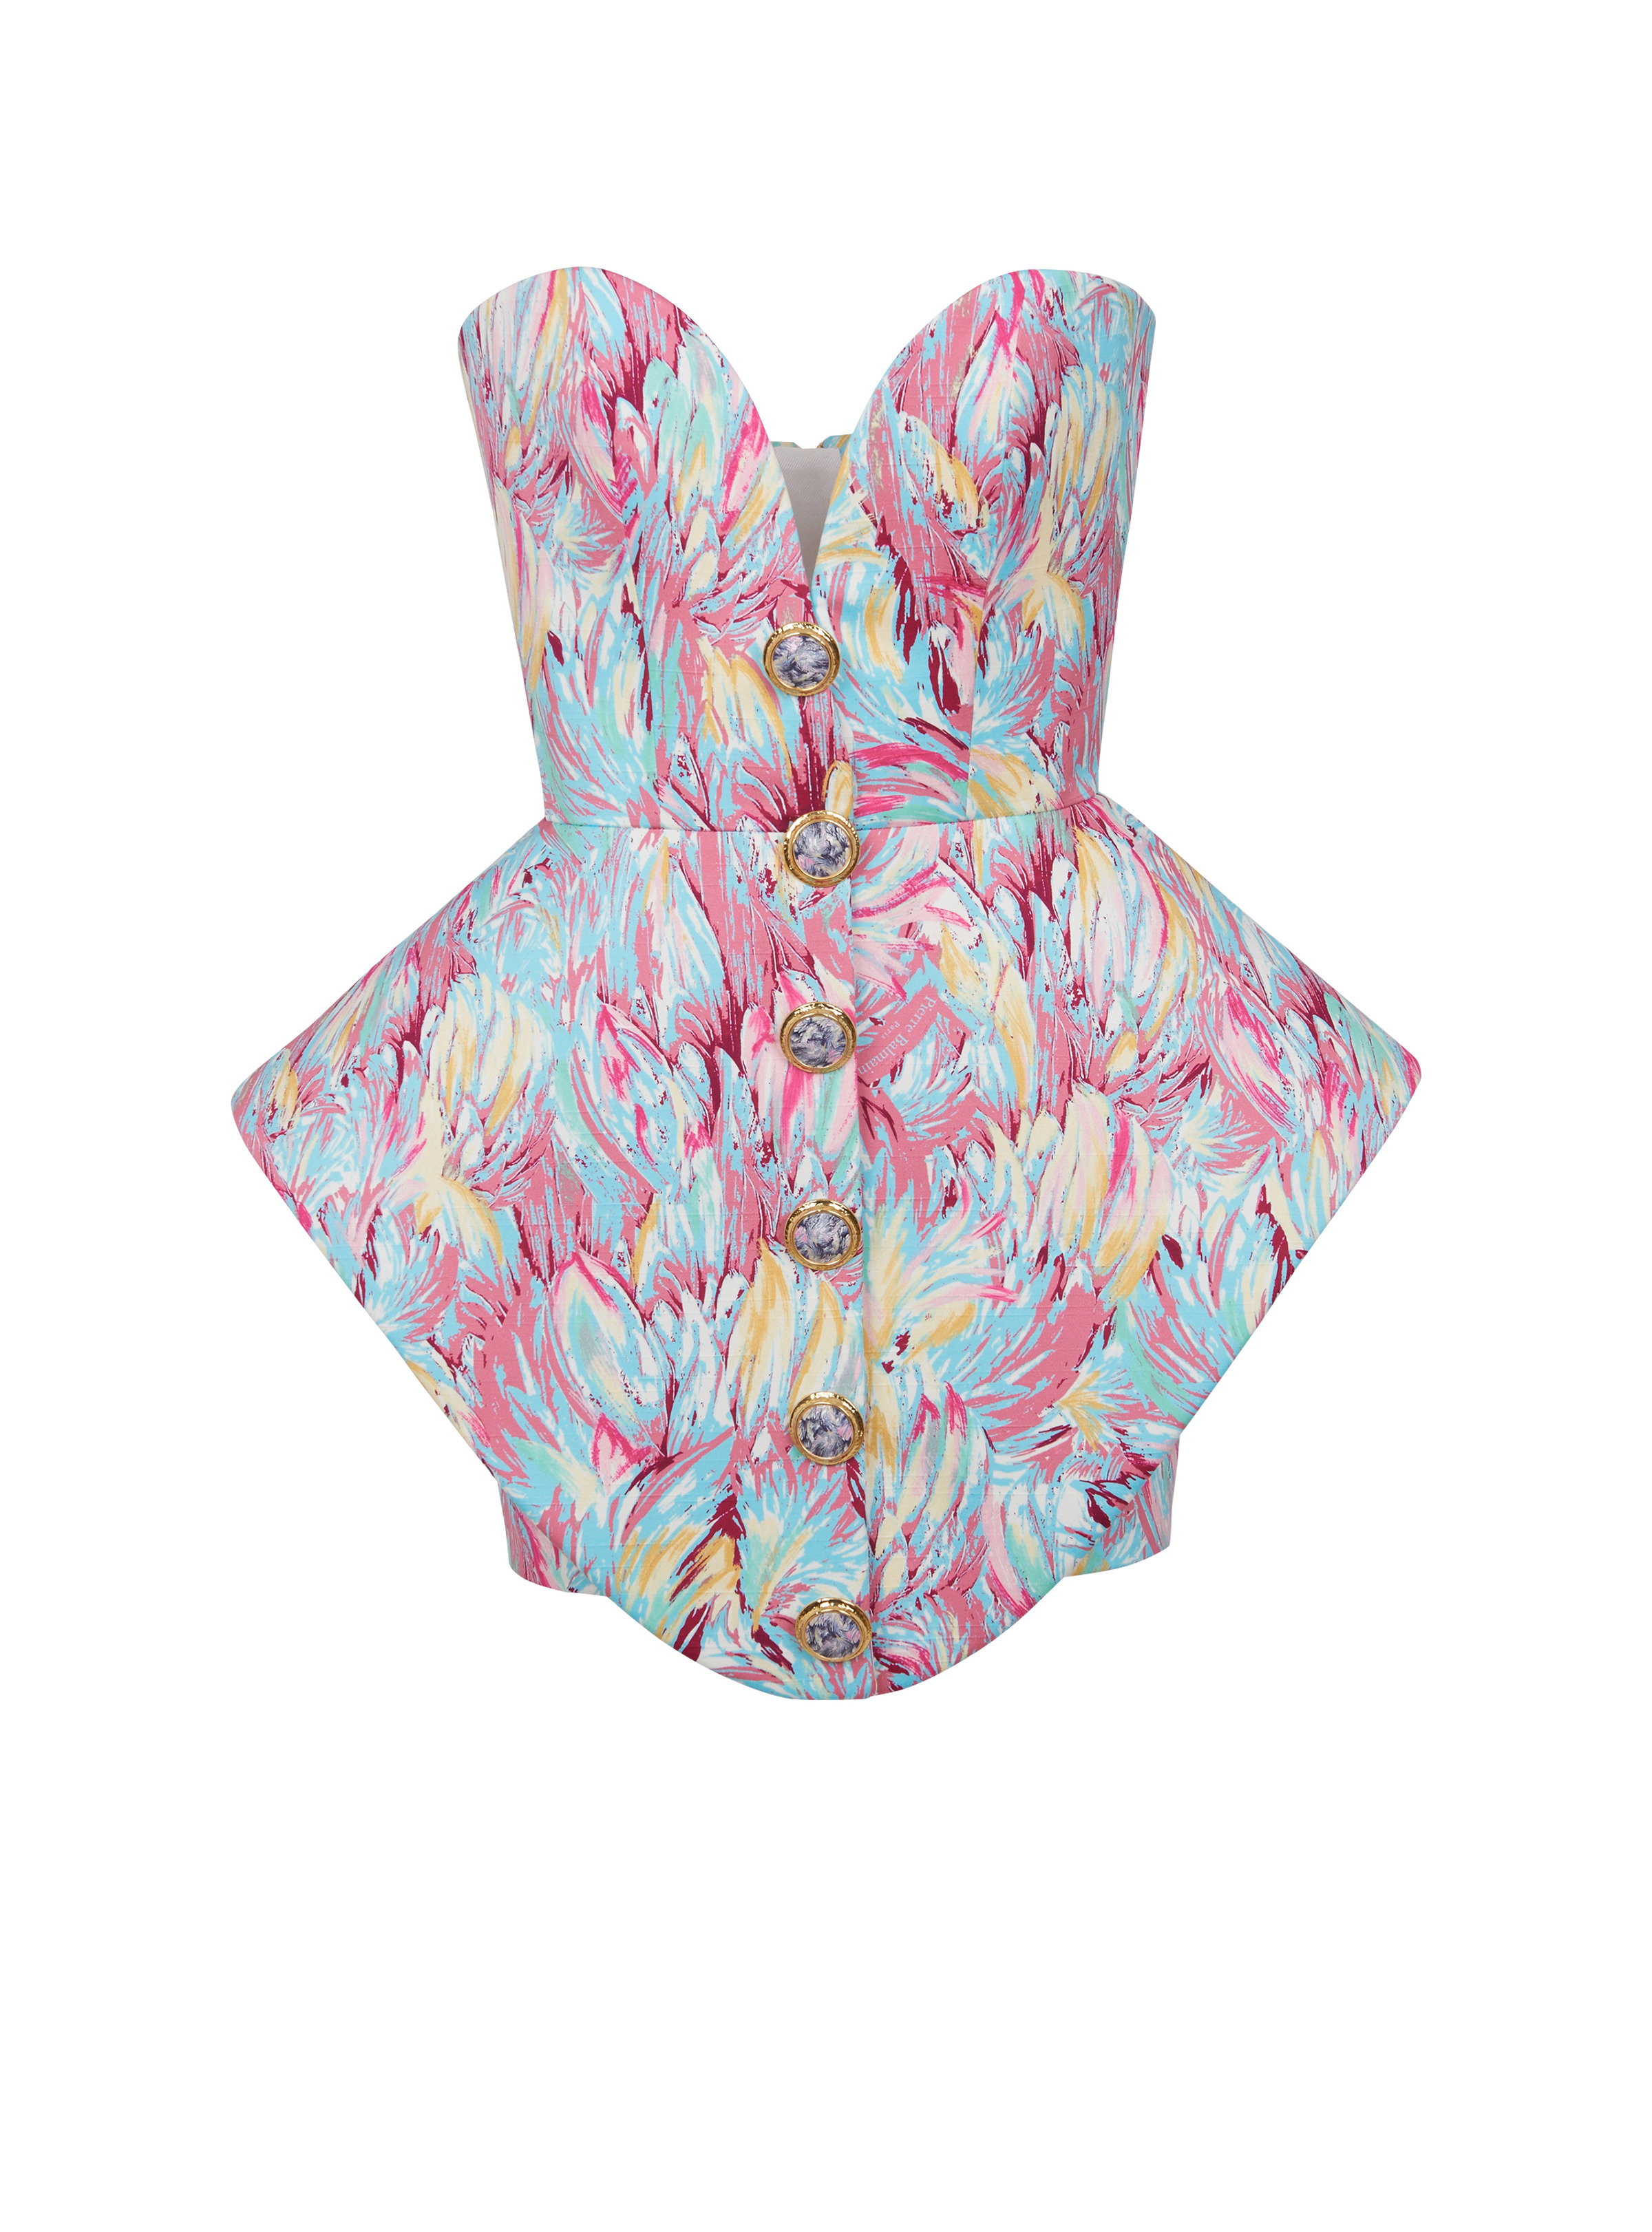 Peplum bustier dress with Feather print - 1